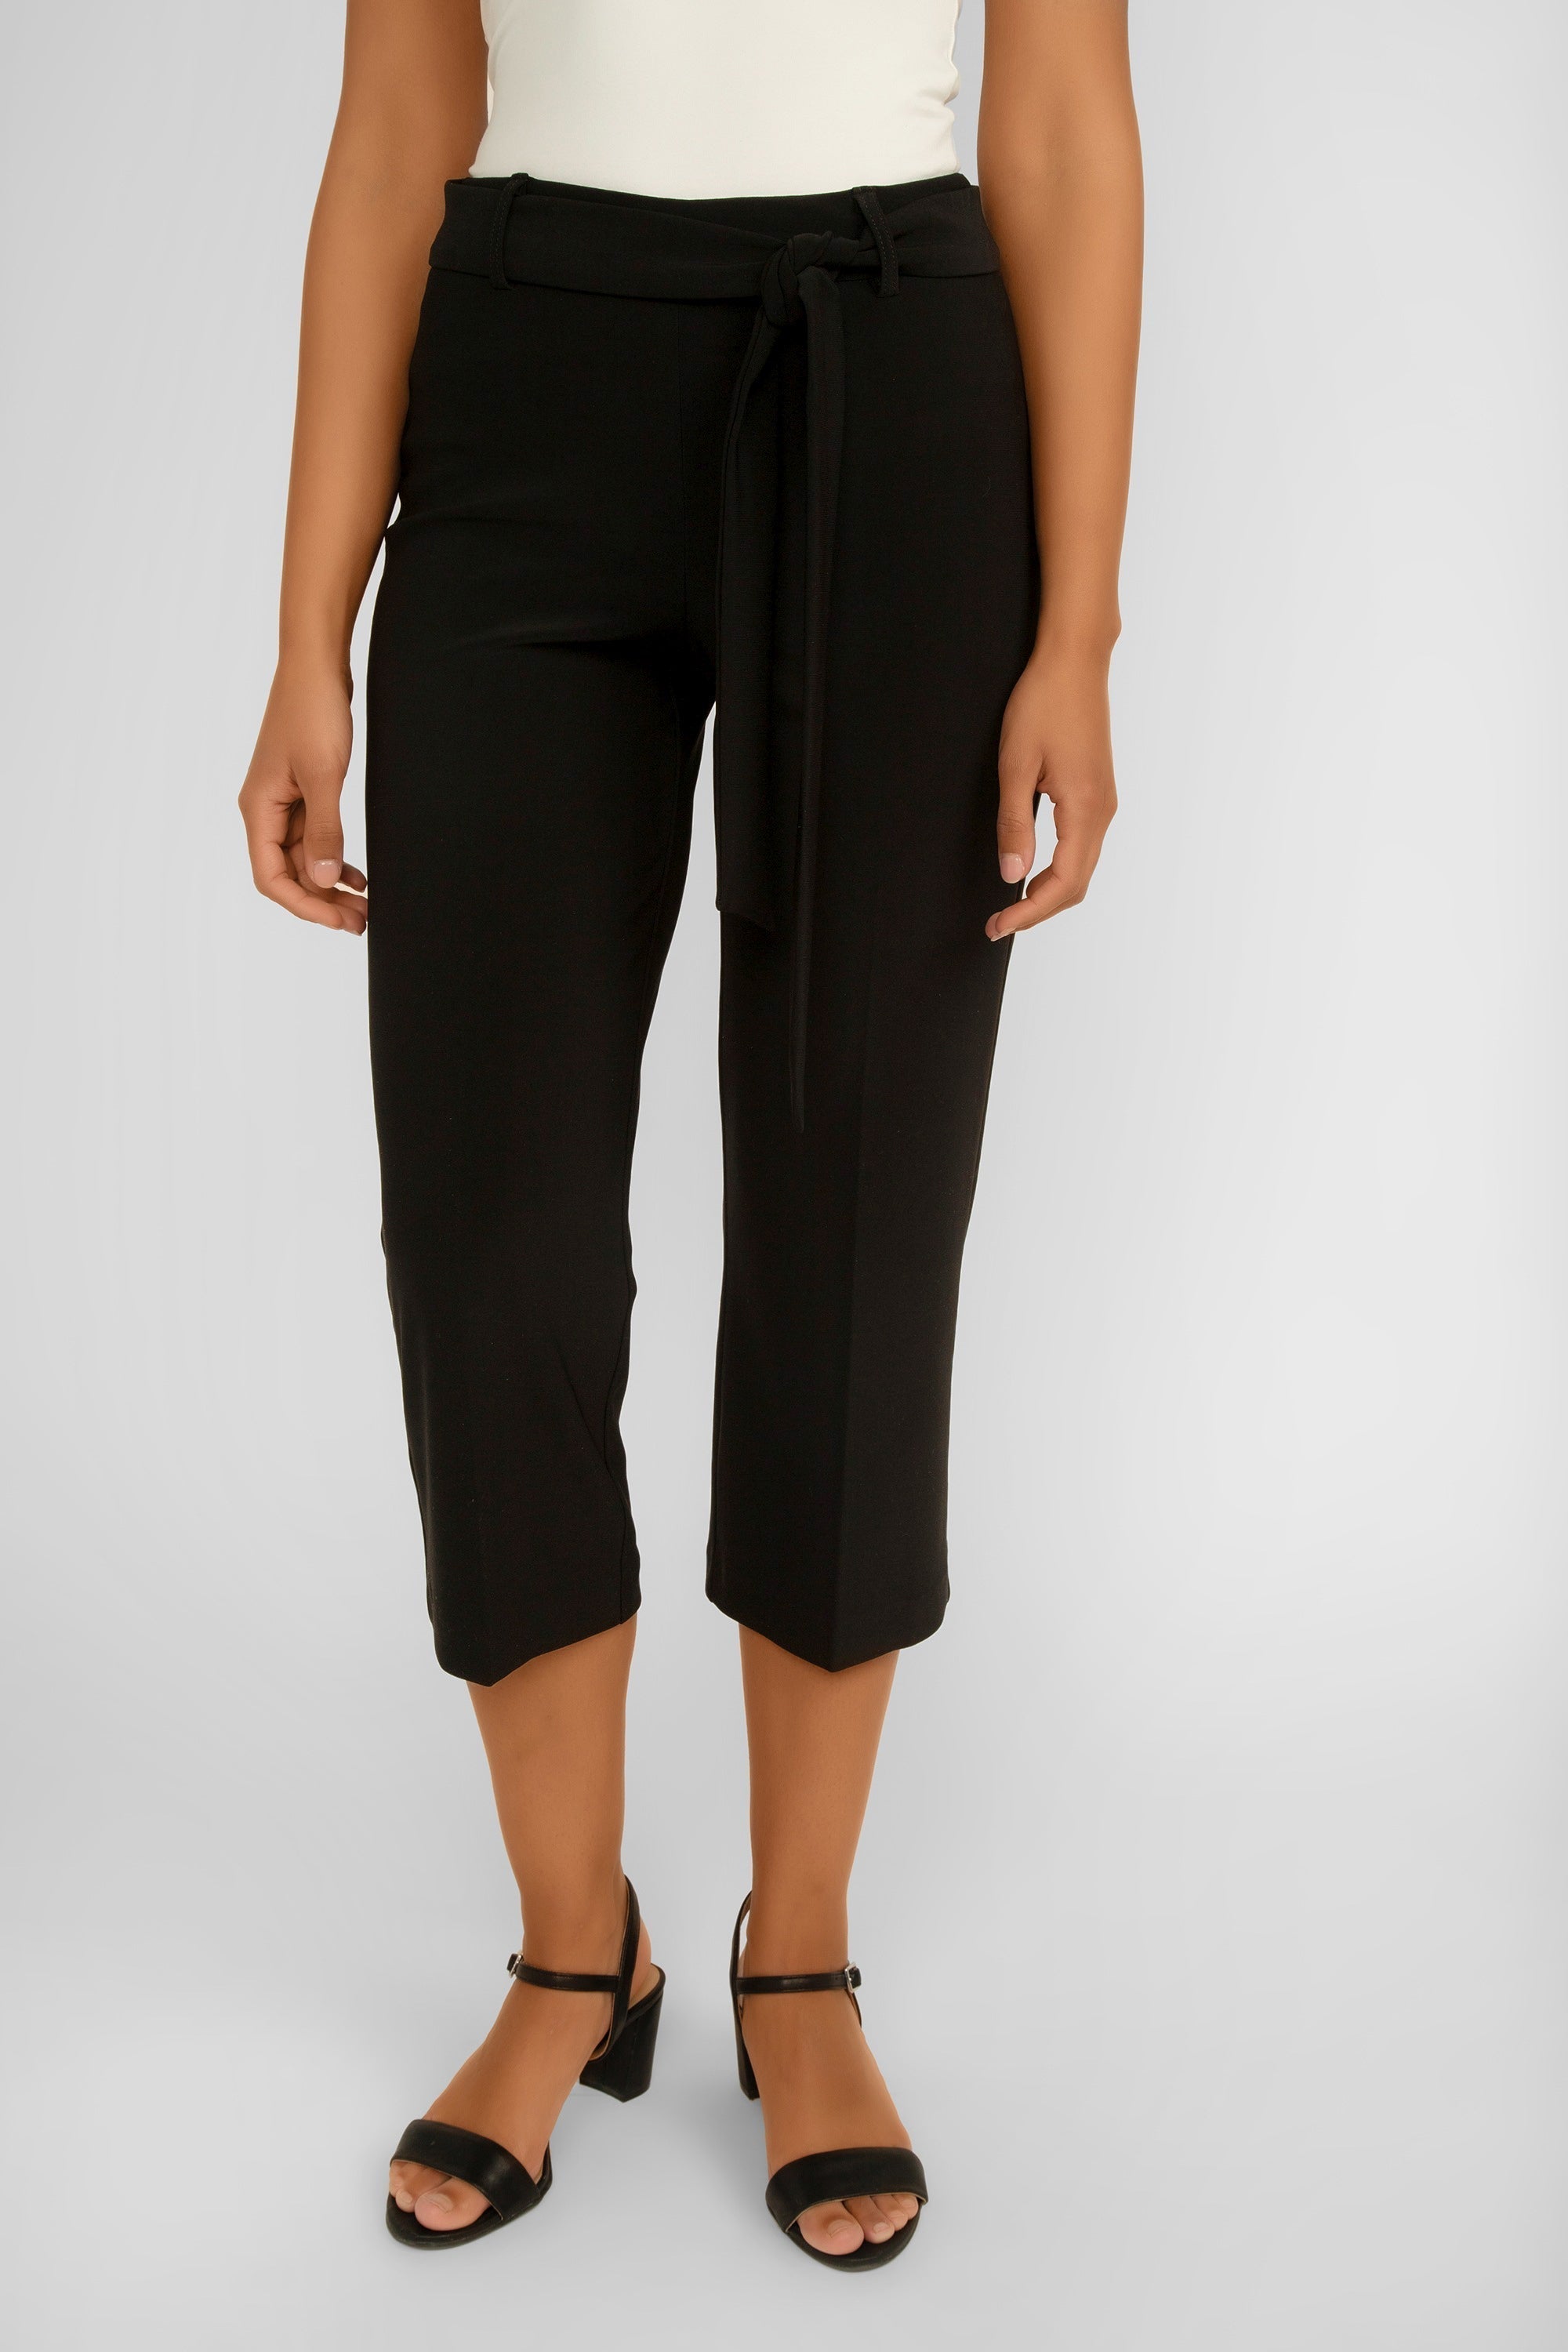 Joseph Ribkoff (241071) Women's Bonded Silky Knit, Cropped Pull On Culotte Pants in Black]